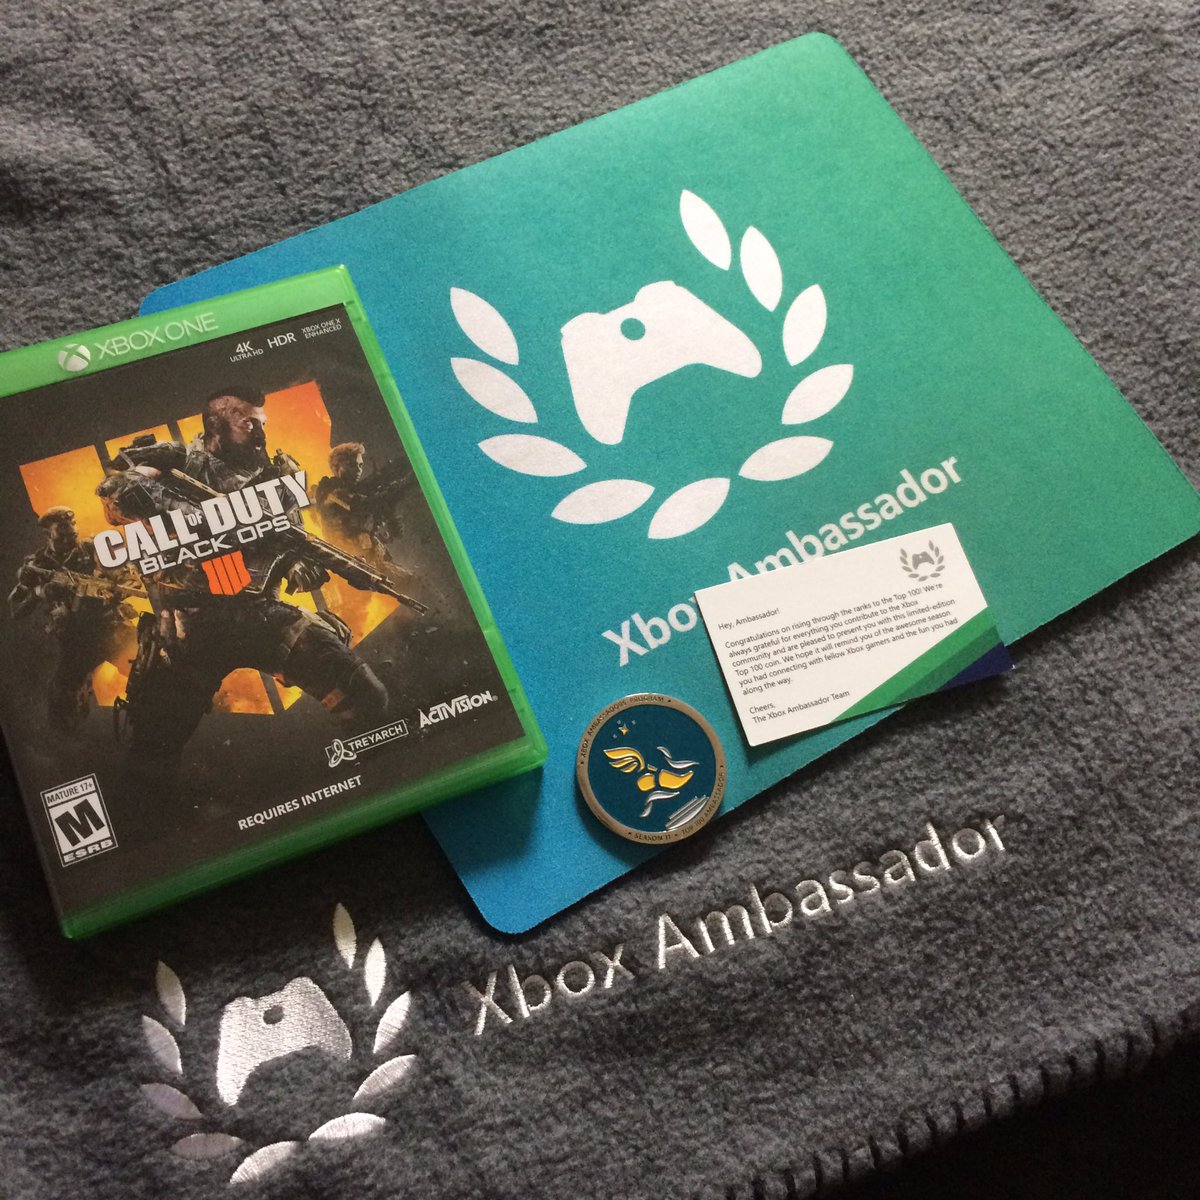 Xbox Ambassadors on Twitter: "@AtheNozzle That's awesome! Have fun!!" /  Twitter